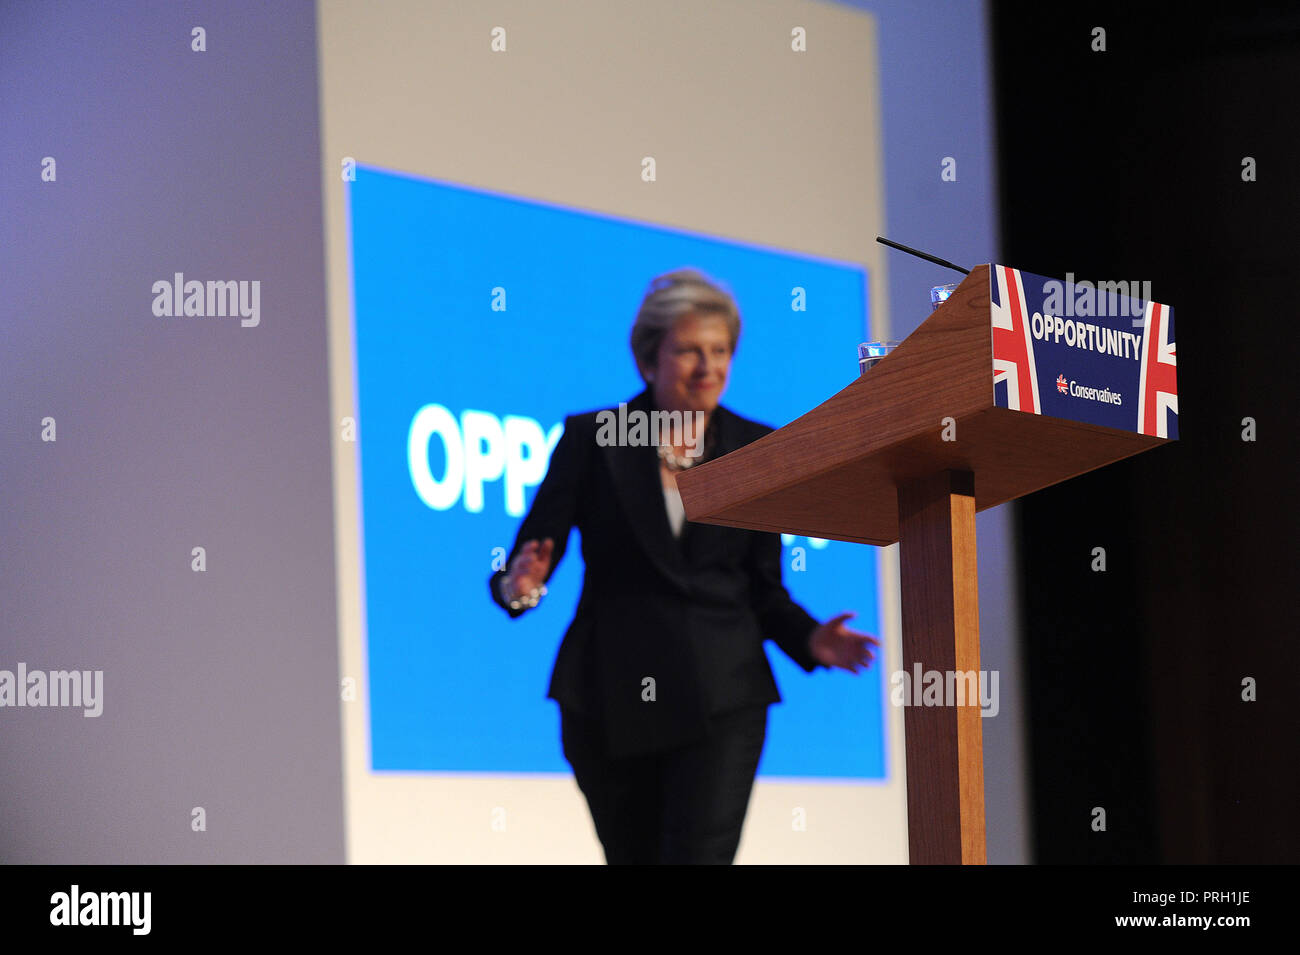 Birmingham, England. 3rd October, 2018.  Theresa May MP, Prime Minister and Leader of the Conservative Party, dances onto stage to deliver her keynote speech to conference on the closing session of the fourth day of the Conservative Party annual conference at the ICC.  Kevin Hayes/Alamy Live News Credit: Kevin Hayes/Alamy Live News Stock Photo